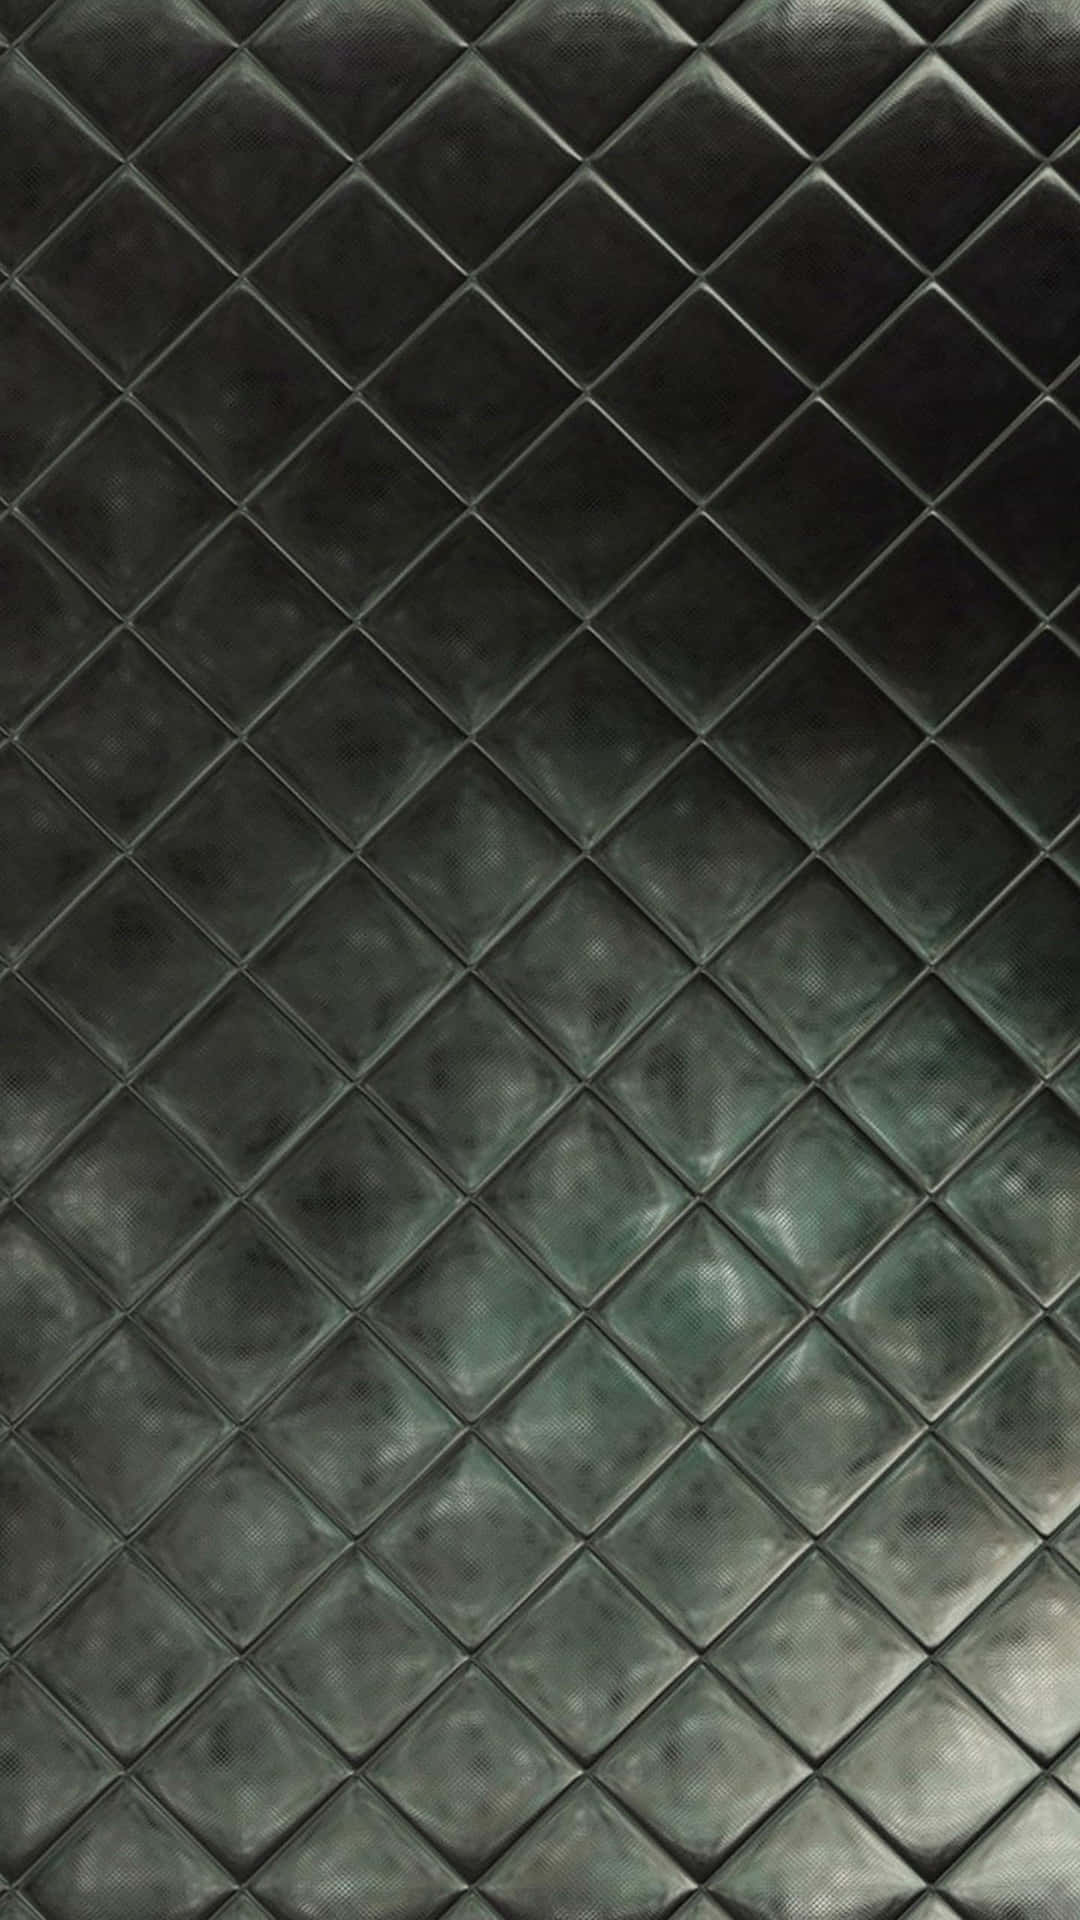 Expensive Black Leather Phone Background